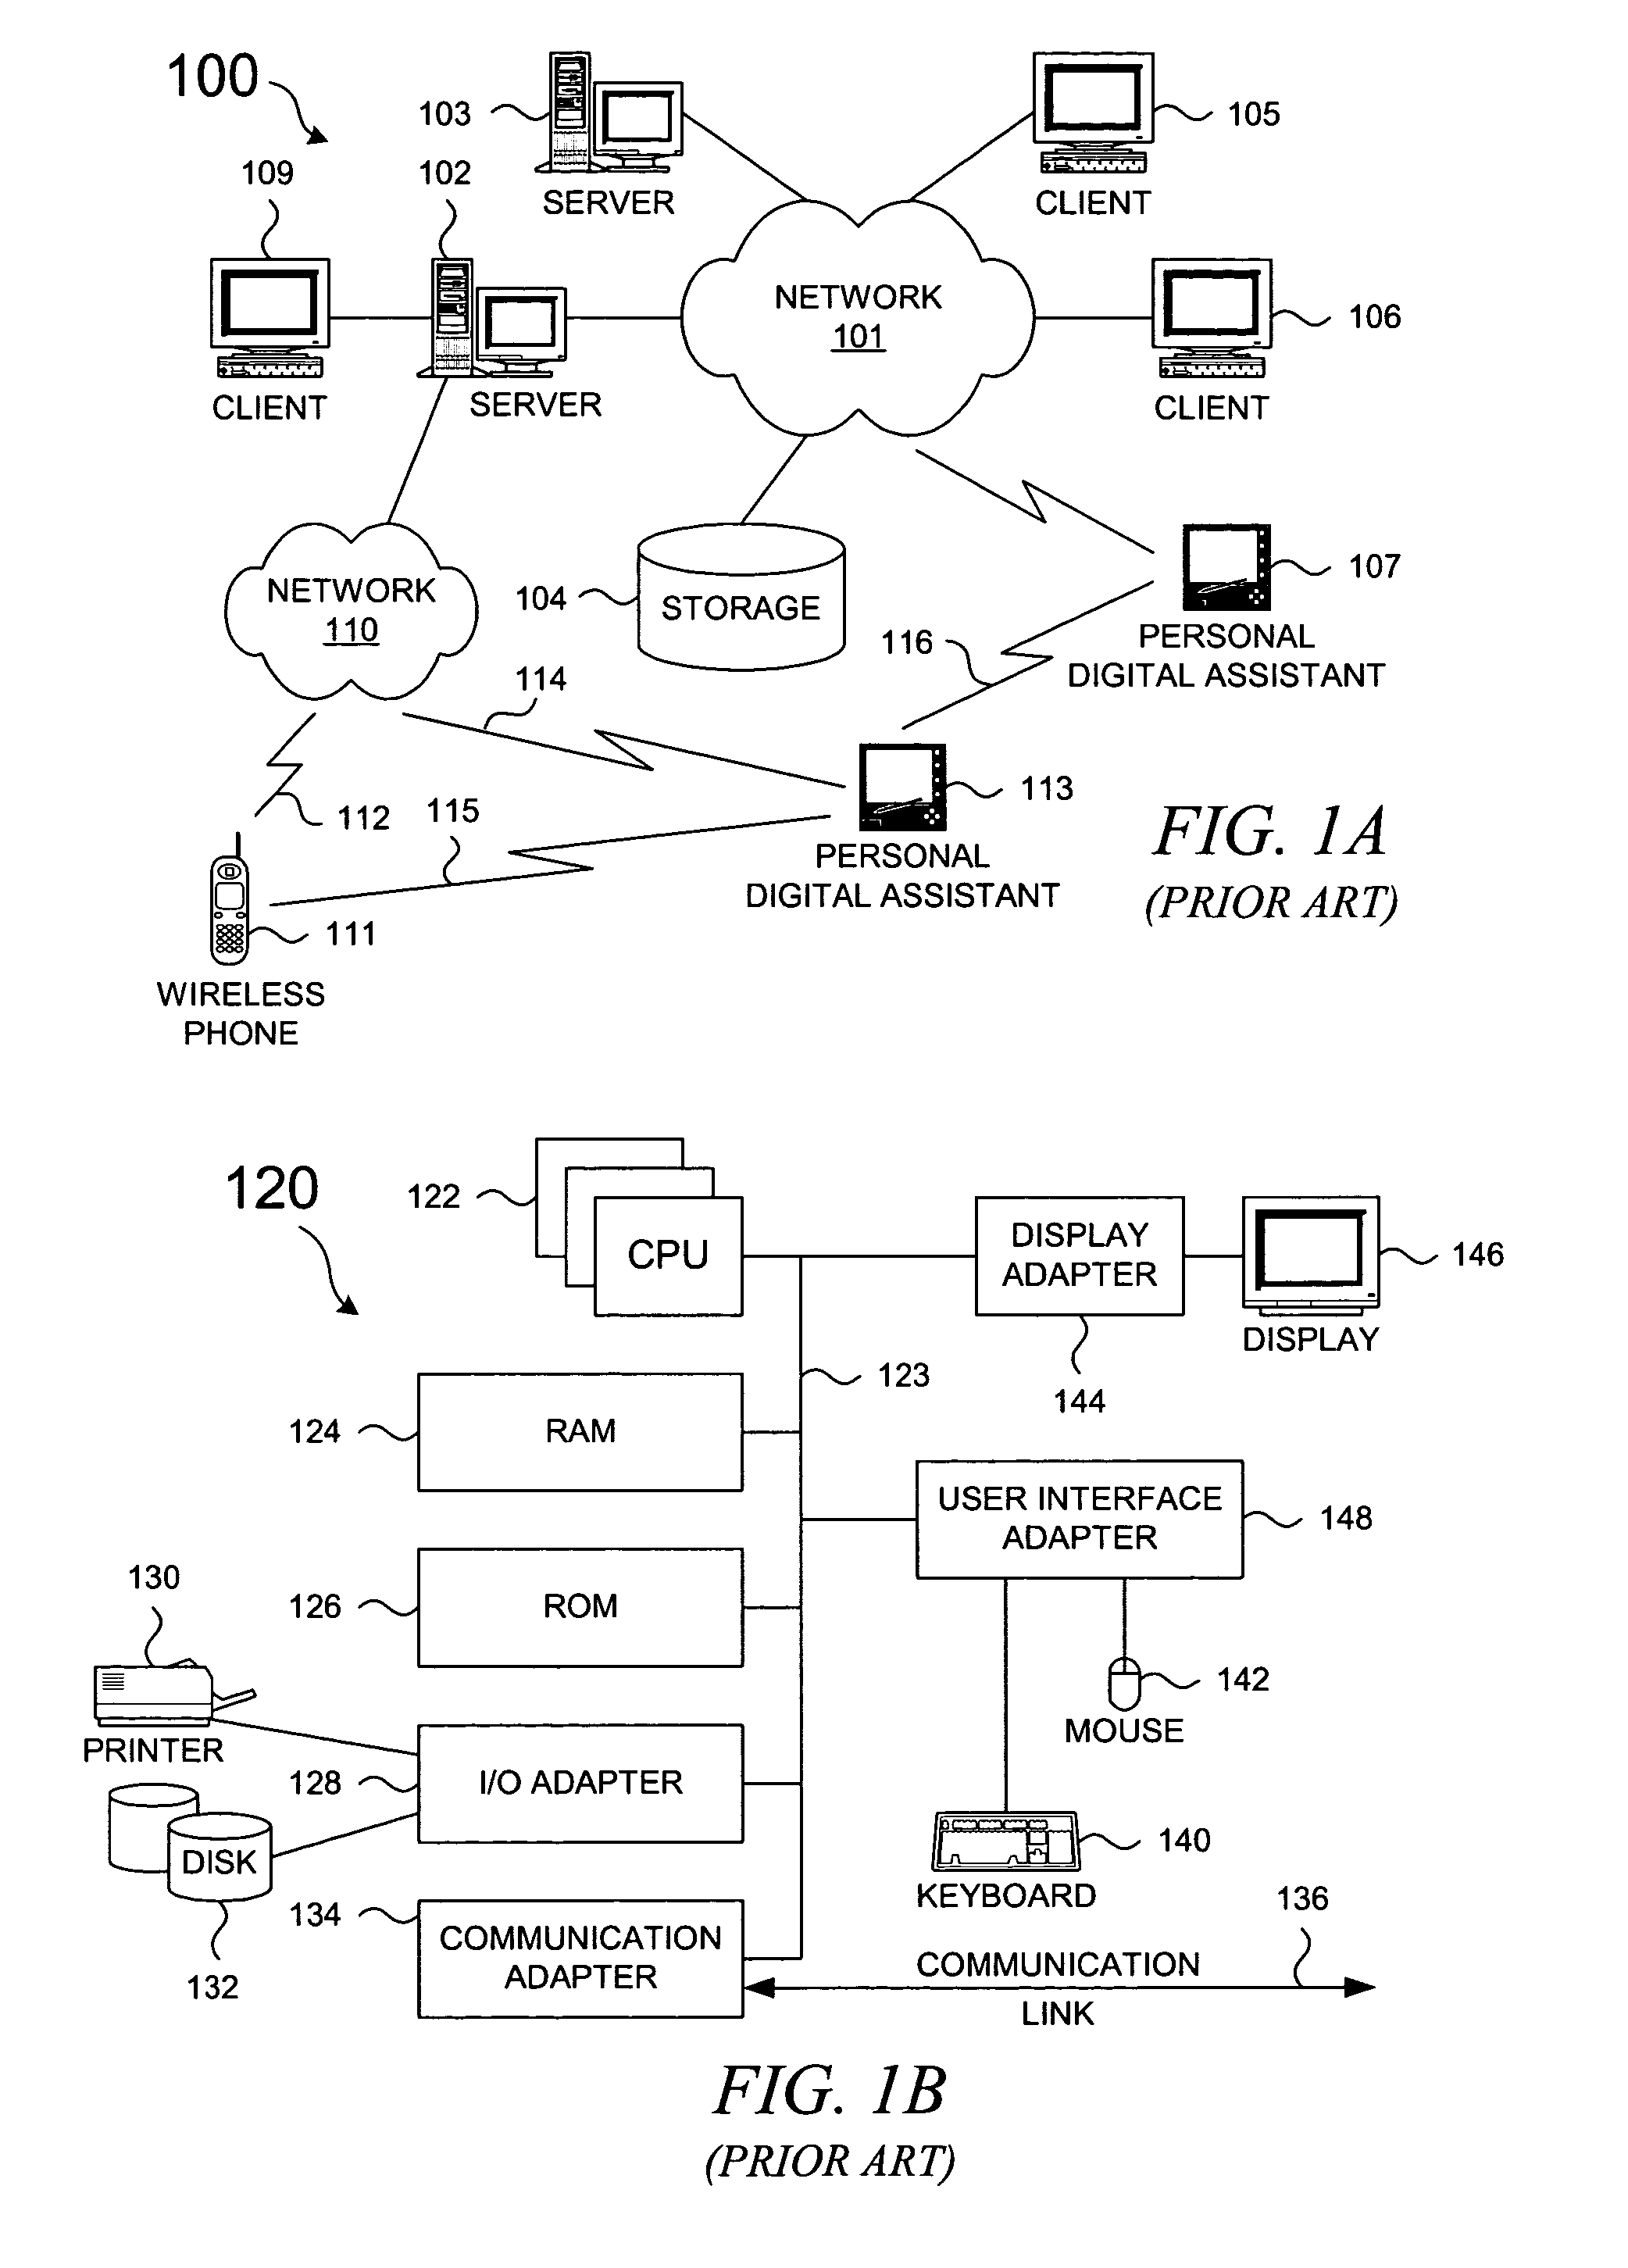 Method and system for providing user control over receipt of cookies from e-commerce applications